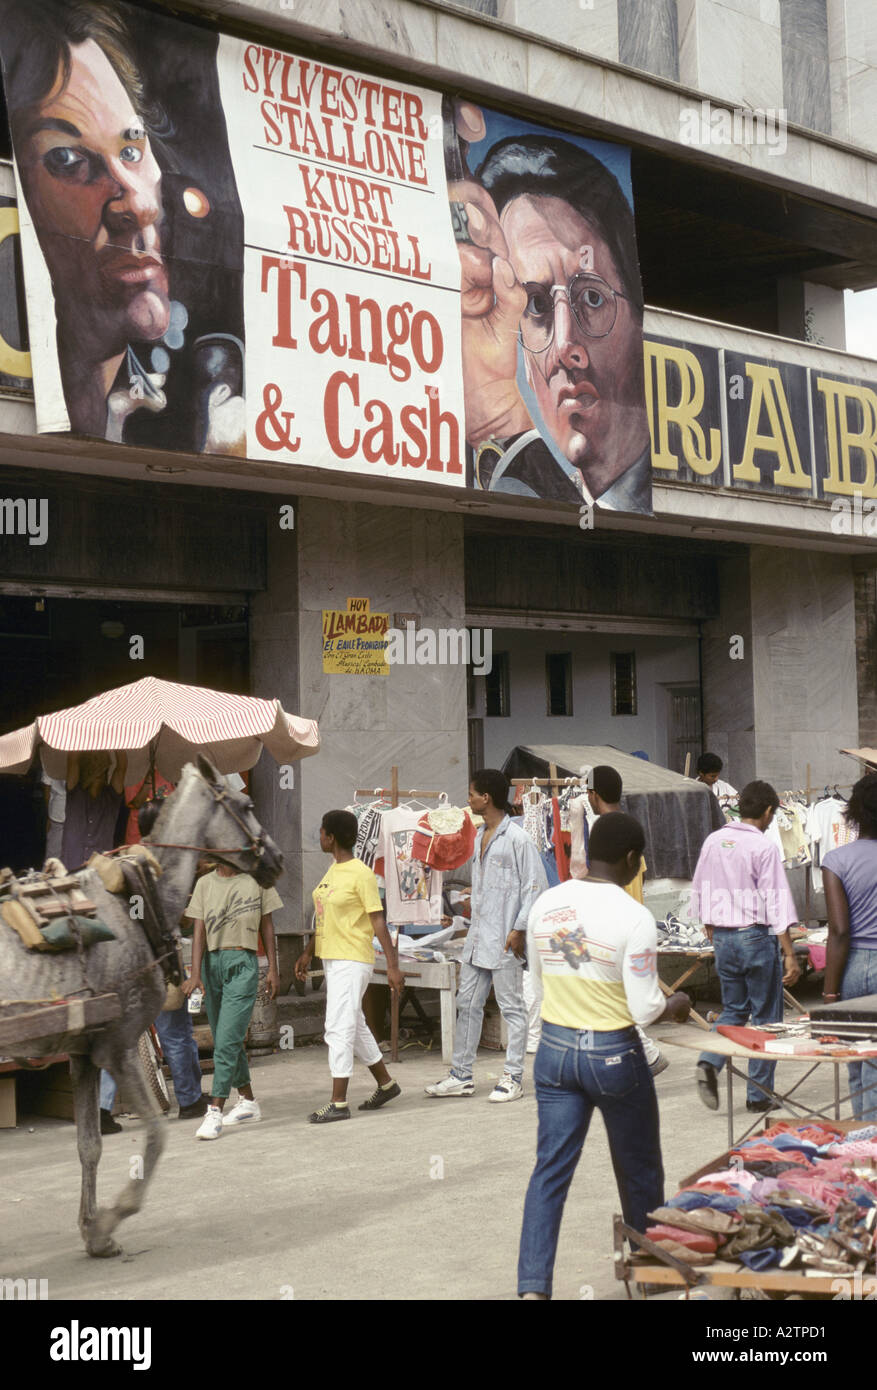 Cinema advert for the film 'Tango and cash' Bogota Colombia Stock Photo